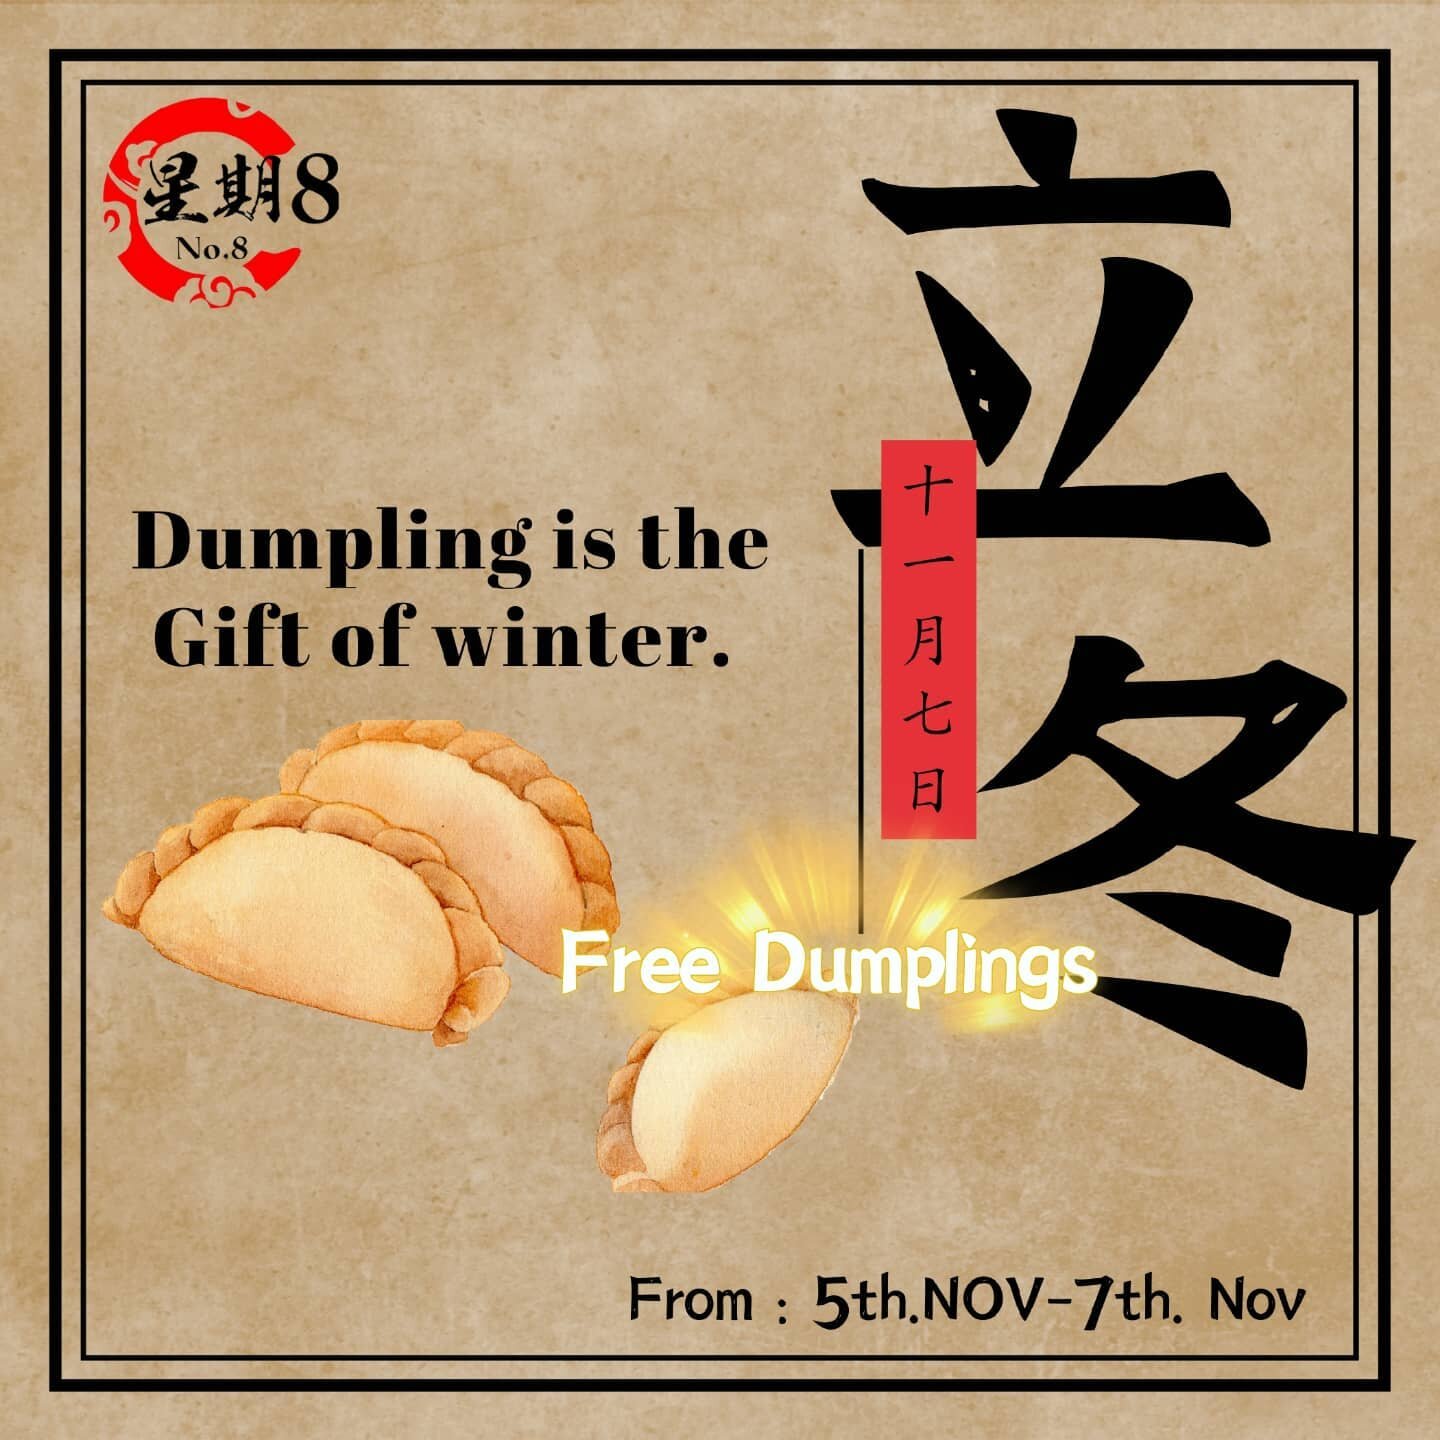 🥟Free Dumplings
❄️ Lidong is one of the 24 solar terms which marks the beginning of winter in Chinese culture. 
❄️ Eating dumpling is the custom of Lidong！

#manchesterfoodie
#manchesterfood 
#manchesterno8hotpot 
#chinesecuisine